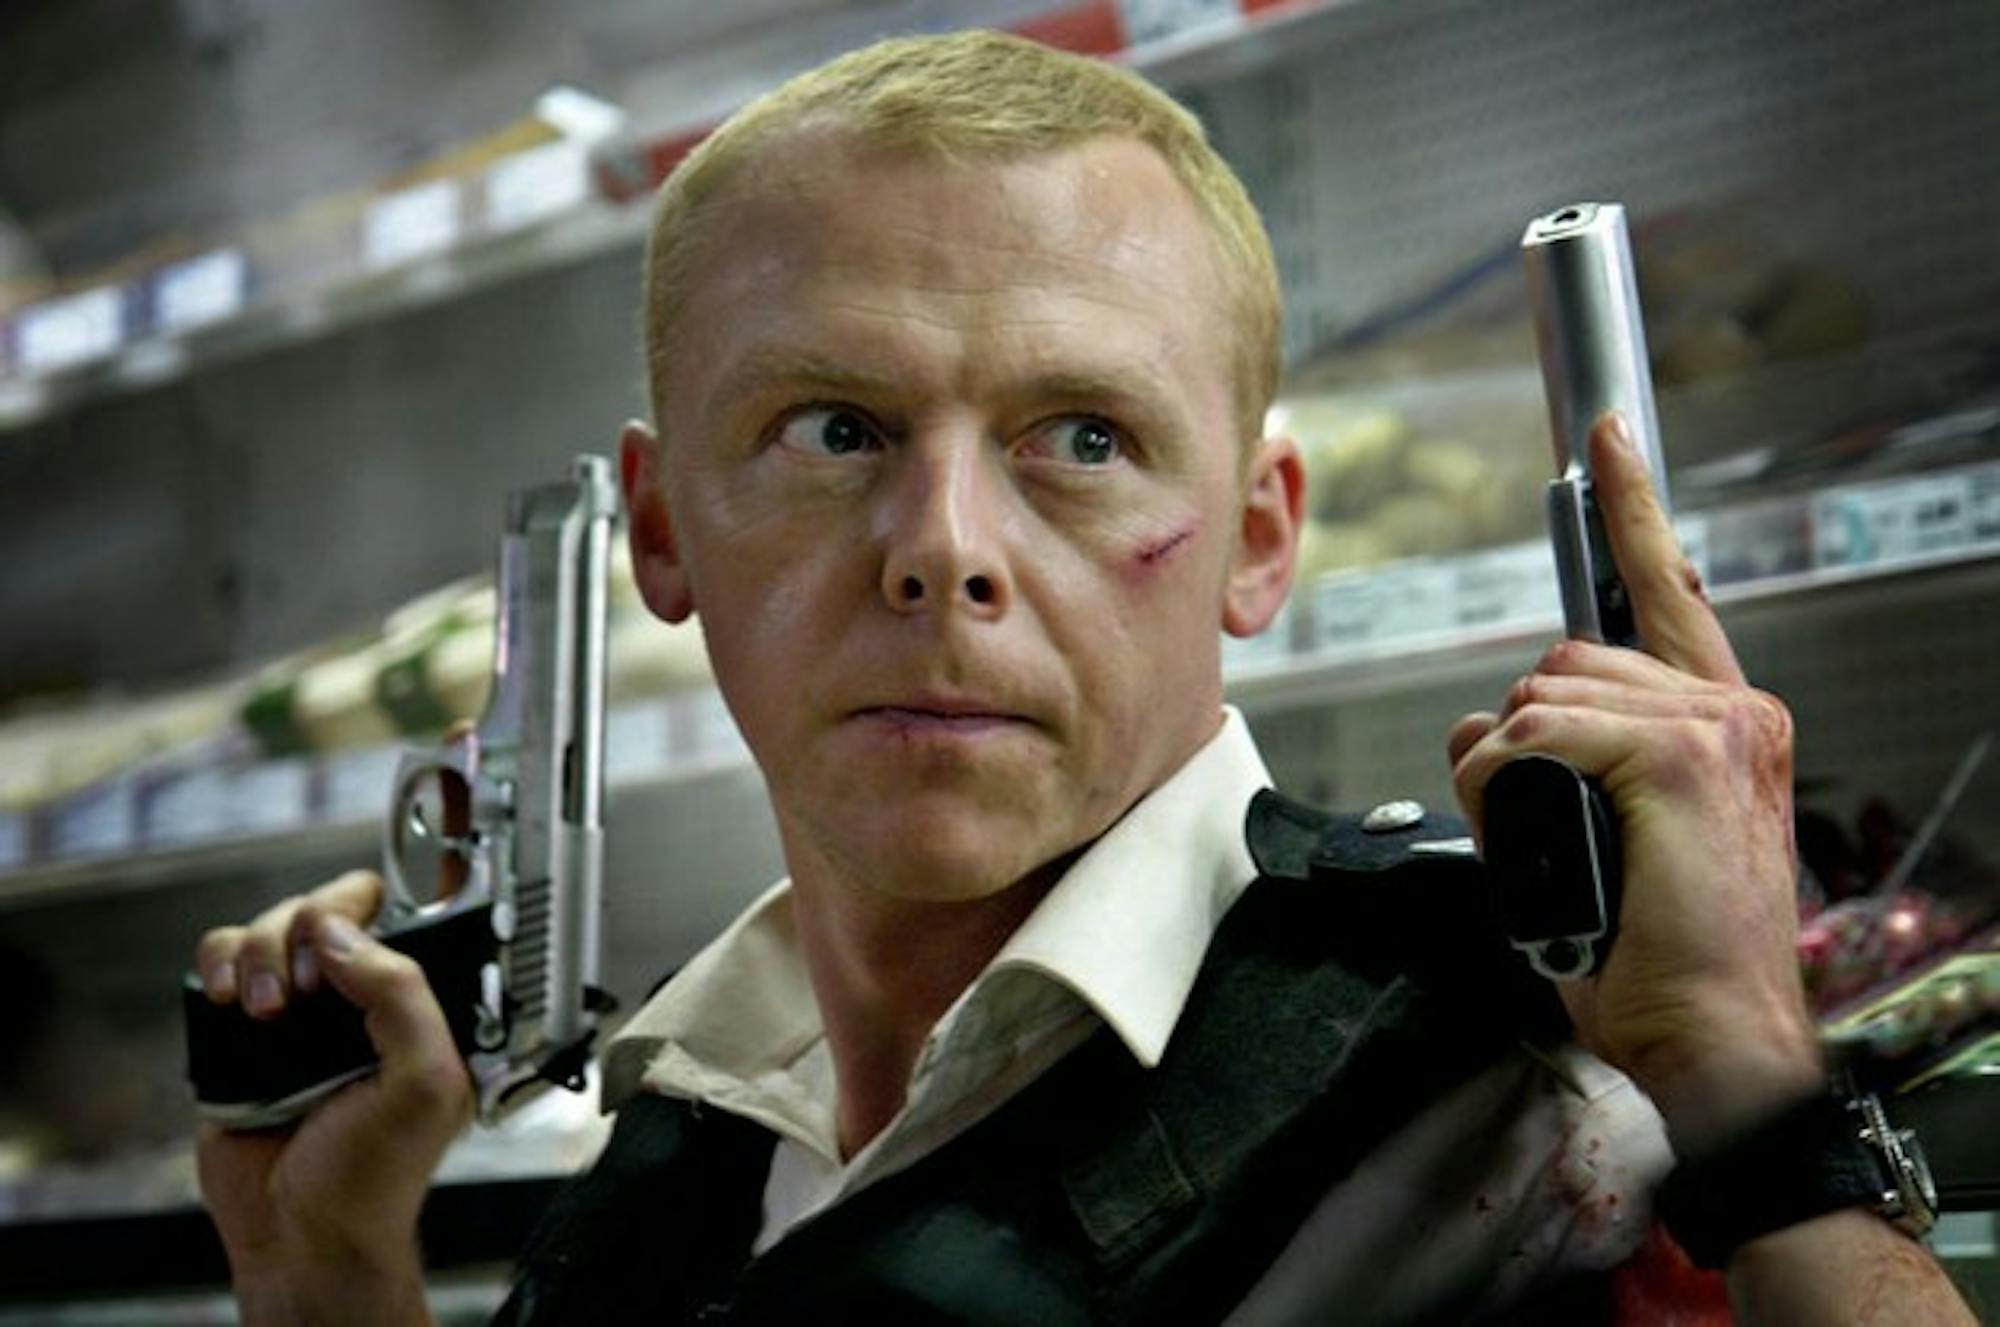 As Nicolas Angel, Simon Pegg shoots up a storm in the hilarious 'Hot Fuzz.'